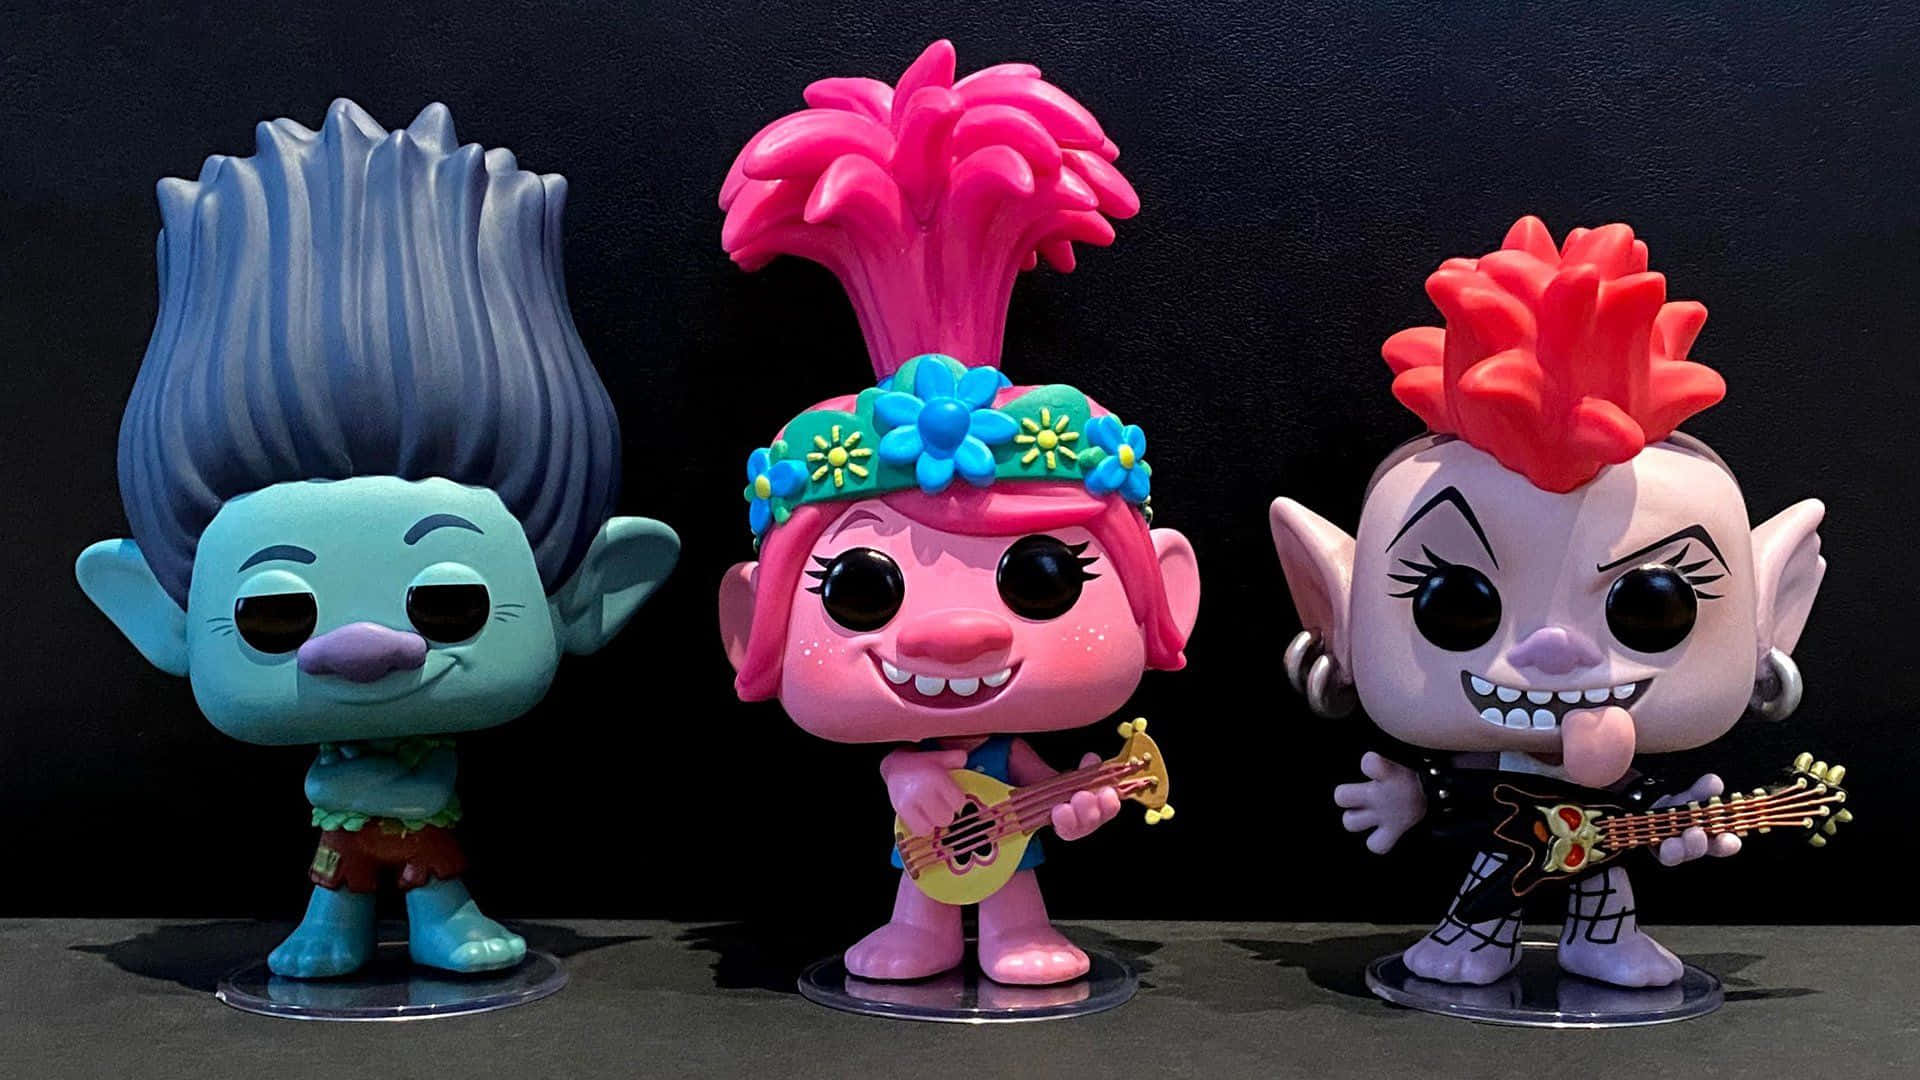 The colorful world of the delightful Trolls